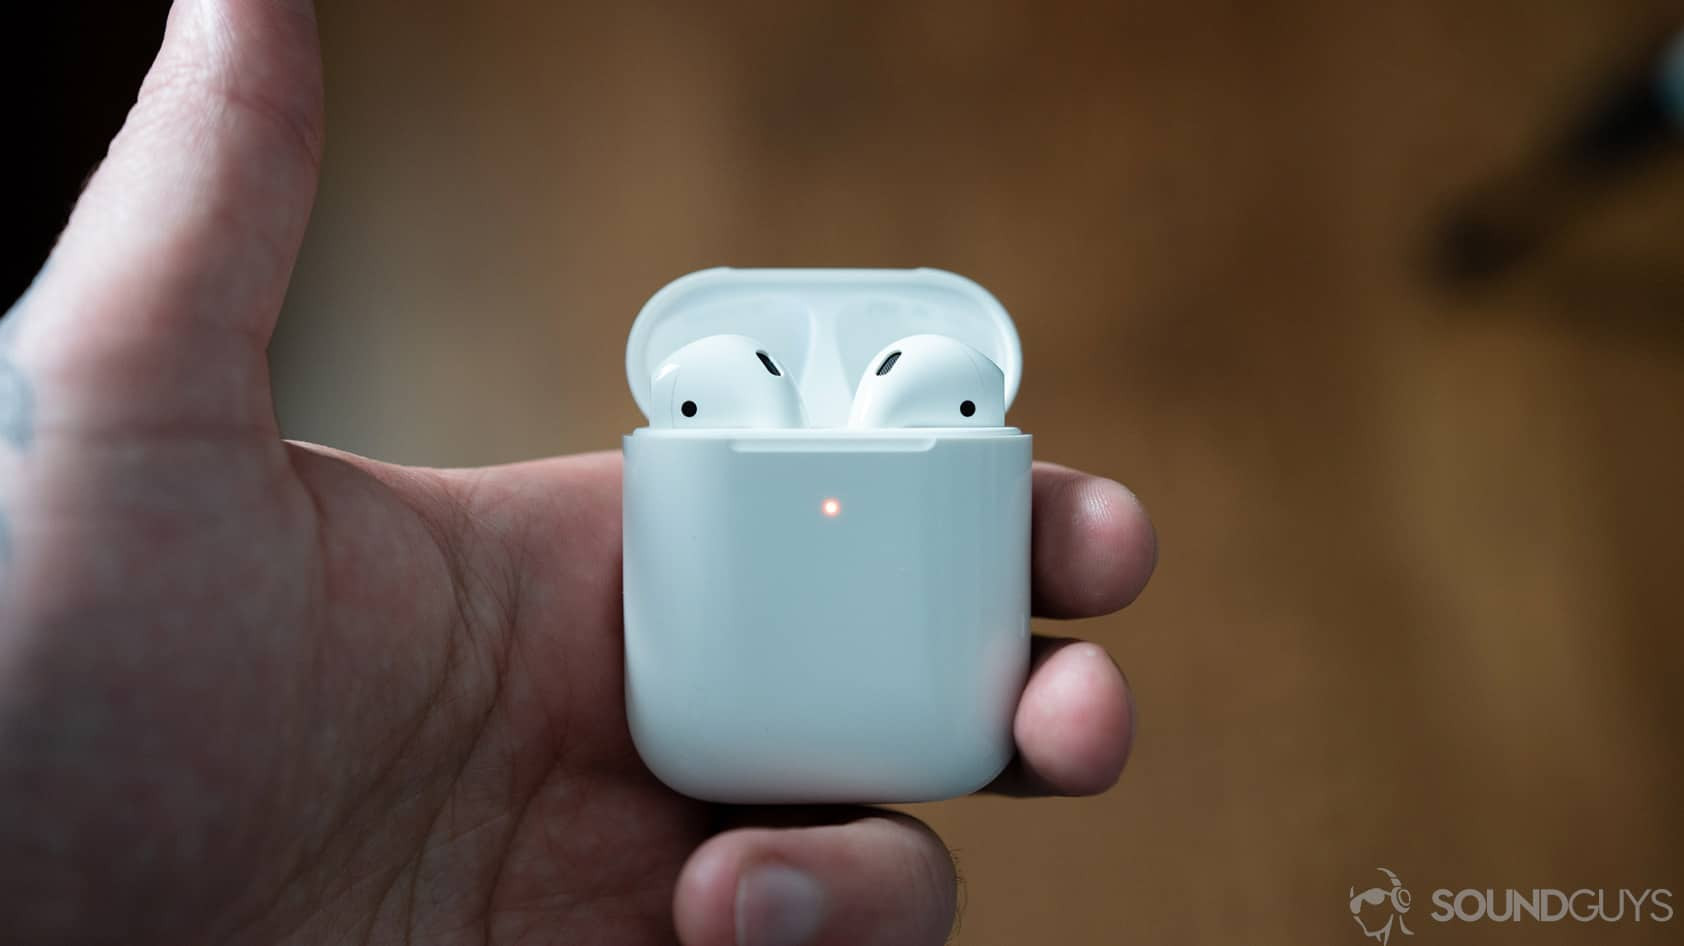 The Apple AirPods in wireless charging case held by man's hand.